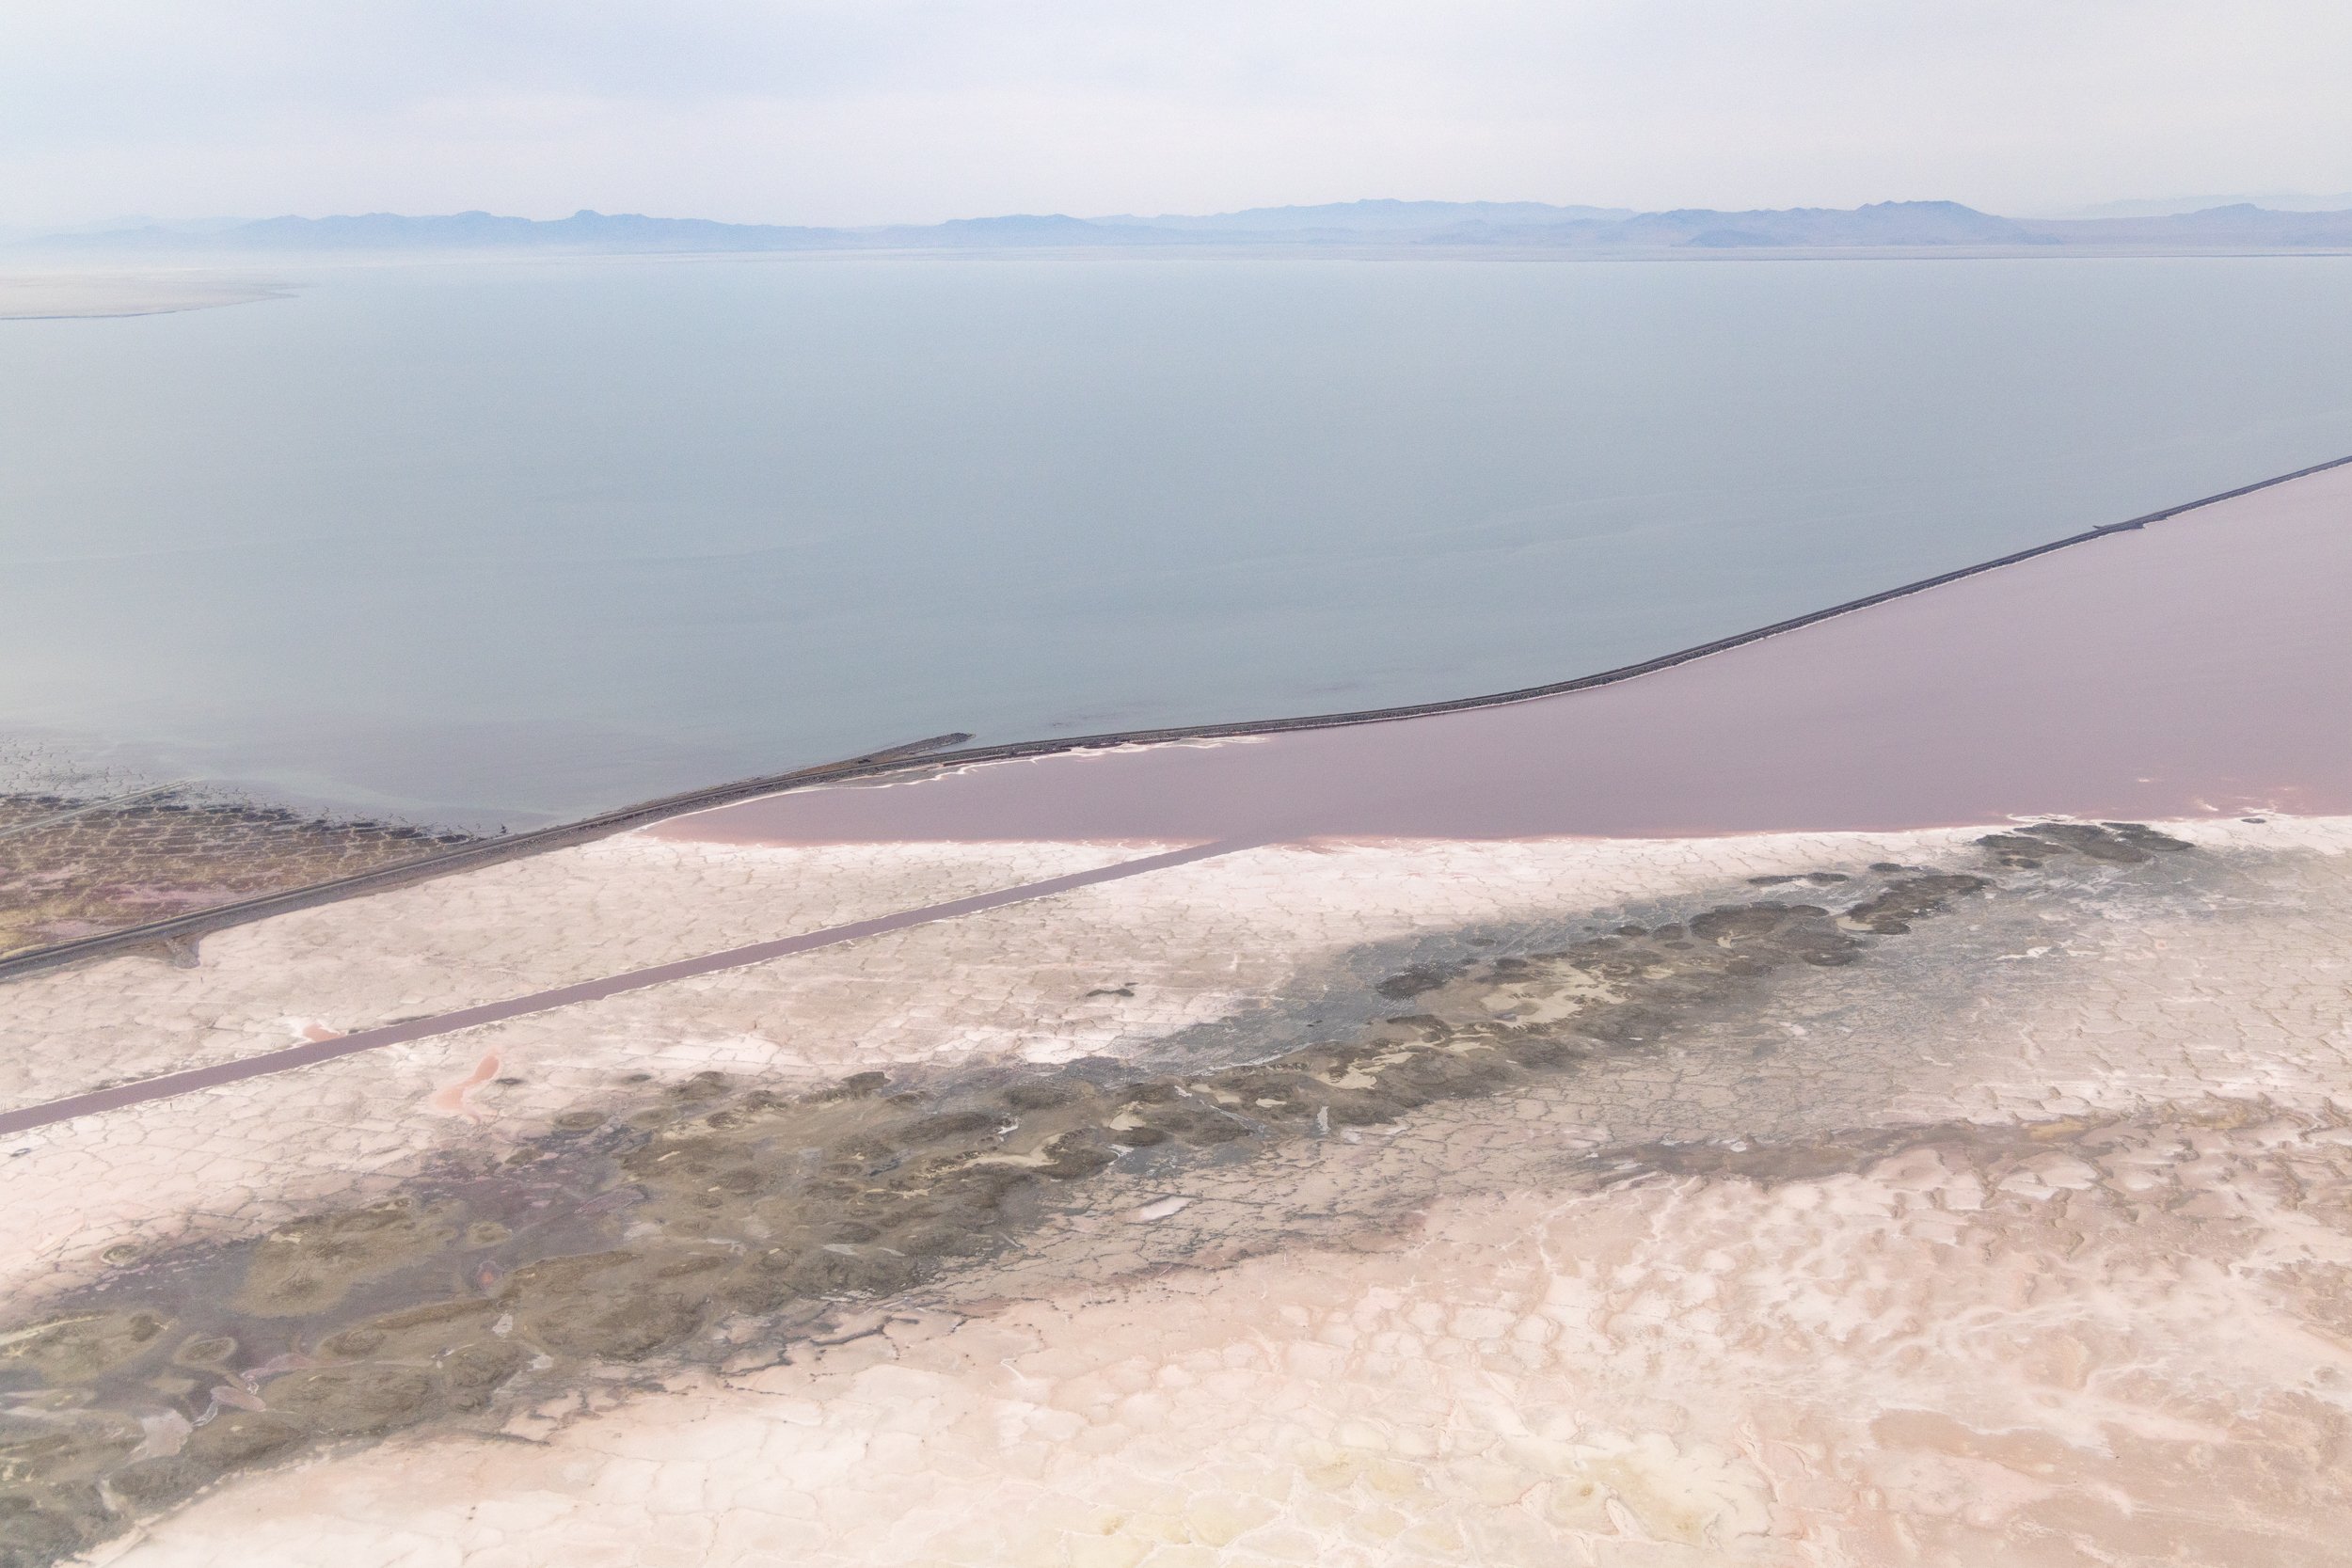  A railroad causeway divides the lake into two arms, north and south.  To the north, the water is pink and devoid of bird-sustaining invertebrates due to its extreme high salt concentration.  The south arm is still blue or green, but is in danger of 